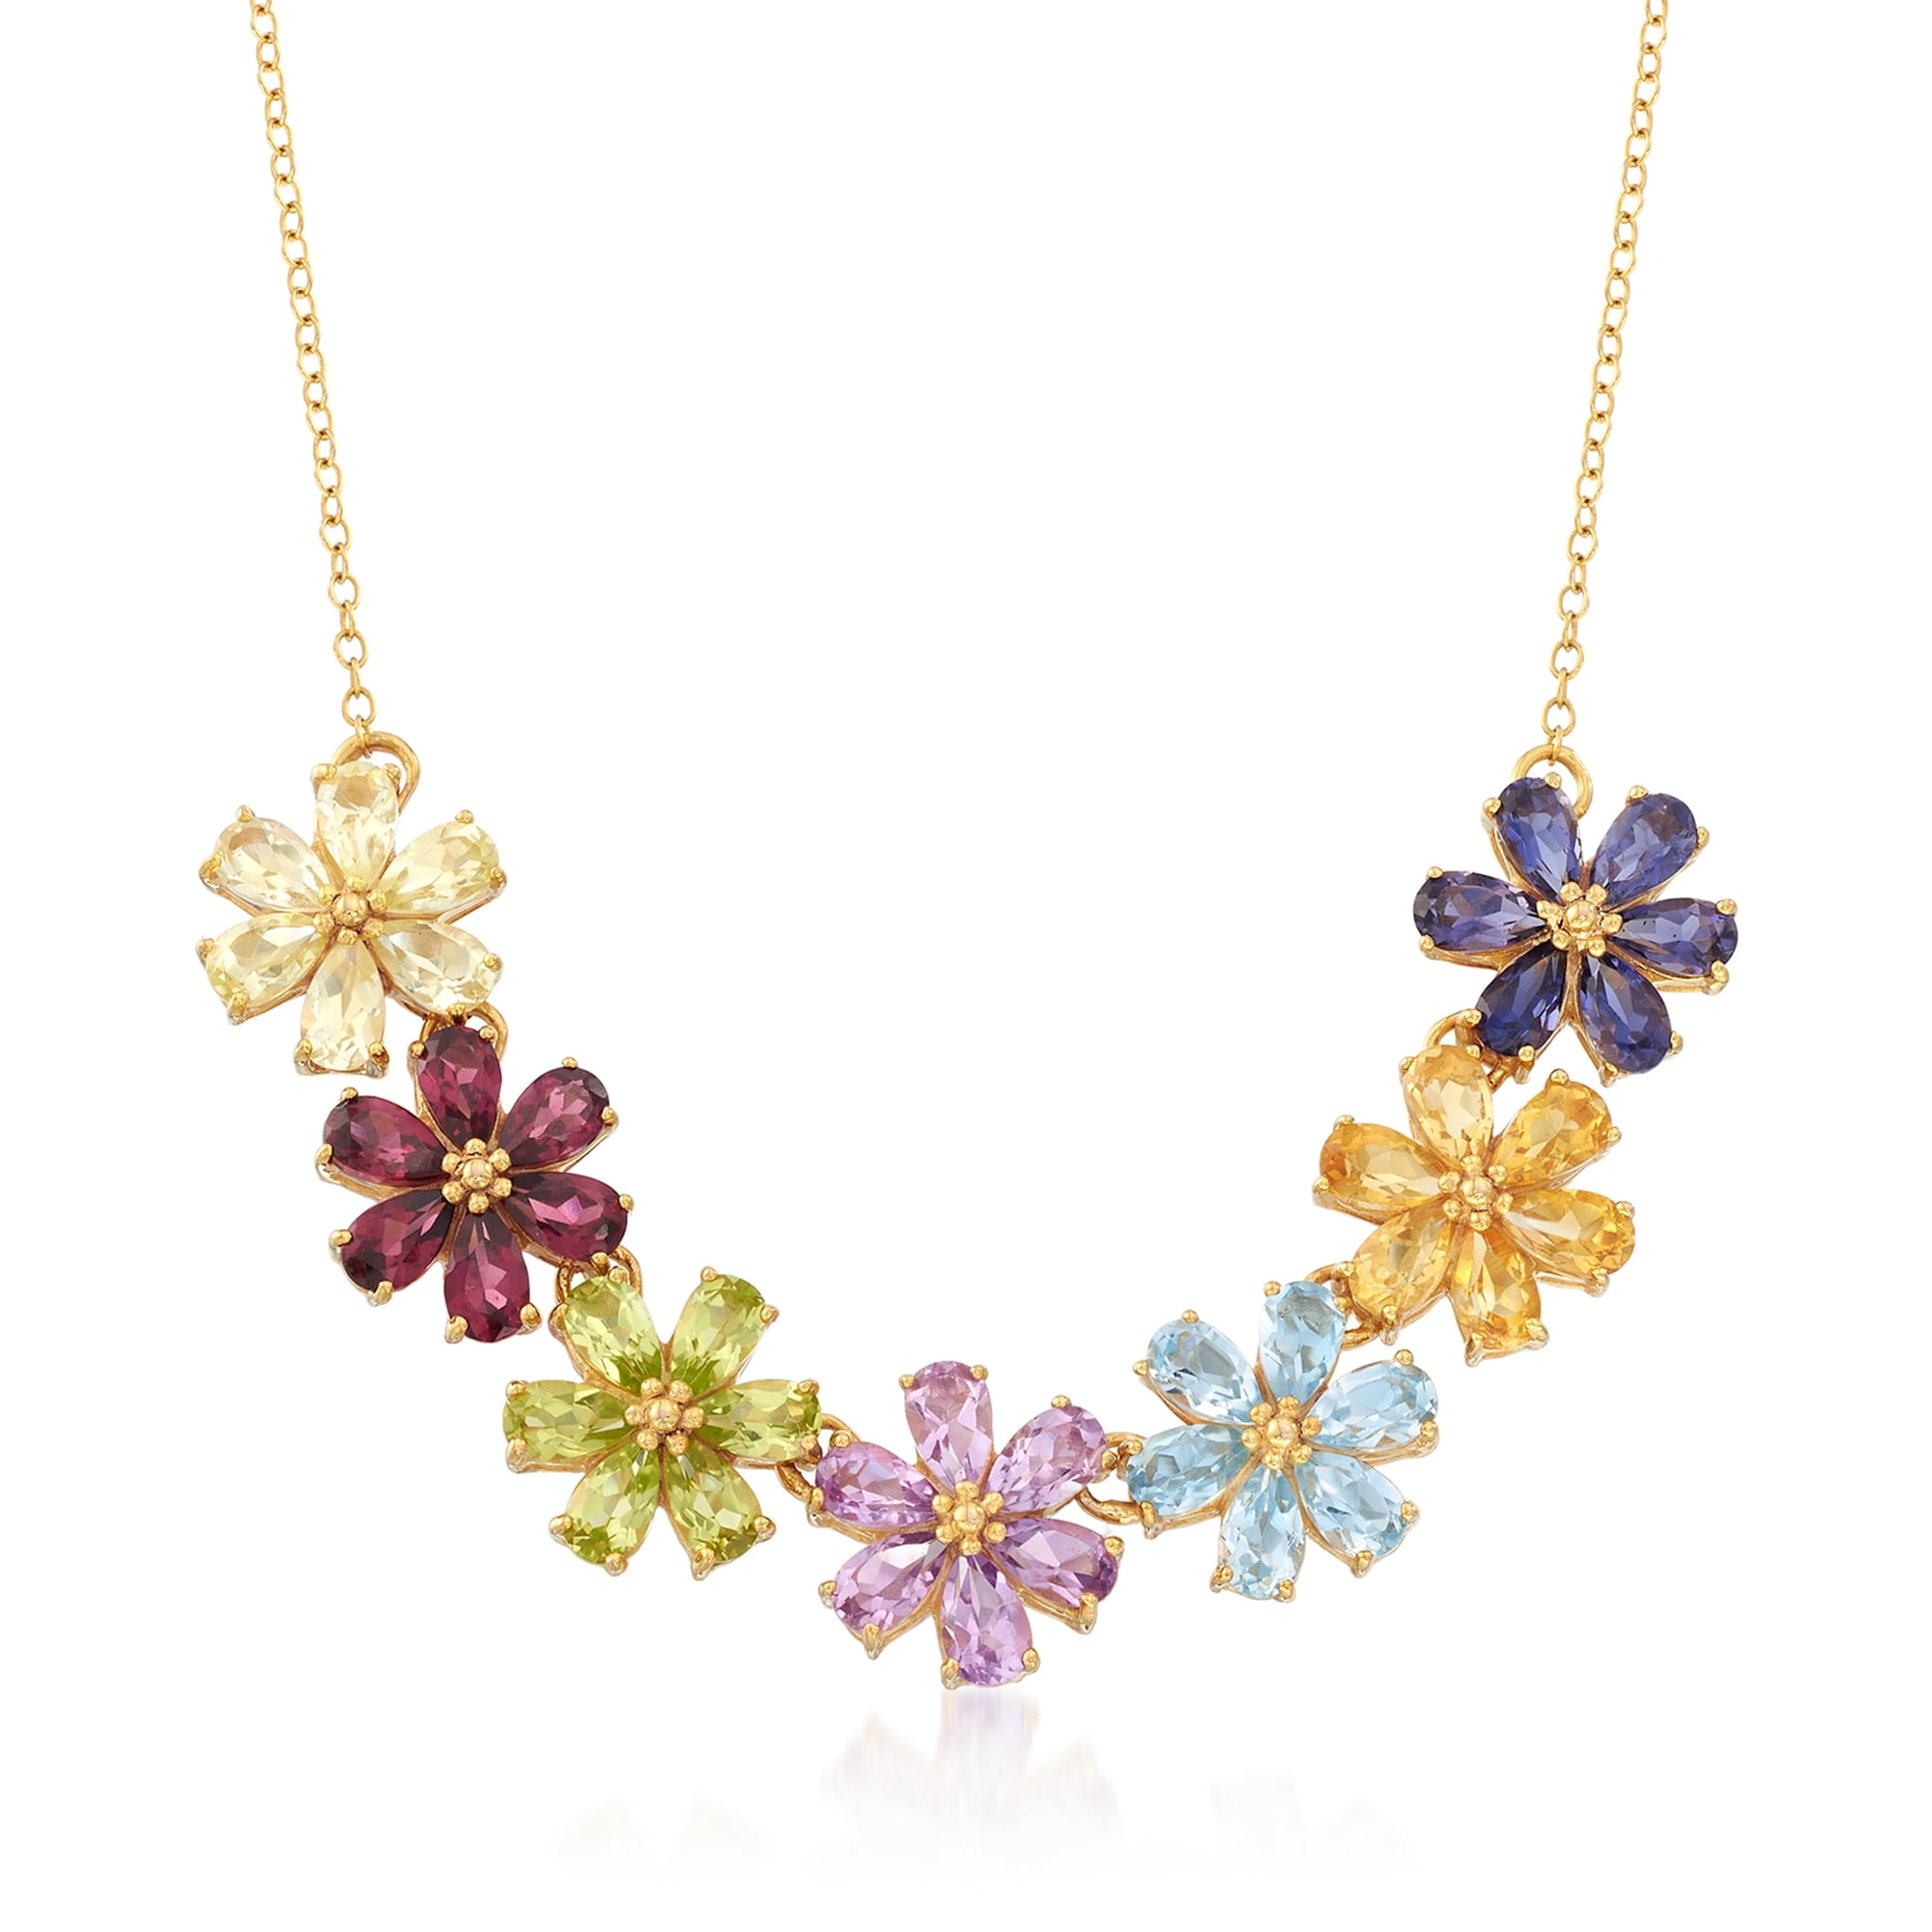 Ross Simons 6 90 ct t w Multi Stone Flower Necklace in 18kt Gold Over Sterling Women s Adult c2c9f798 a771 4000 9c2d 1021a6a3a553.36129f0bac6e40f79281b2b3ece81485